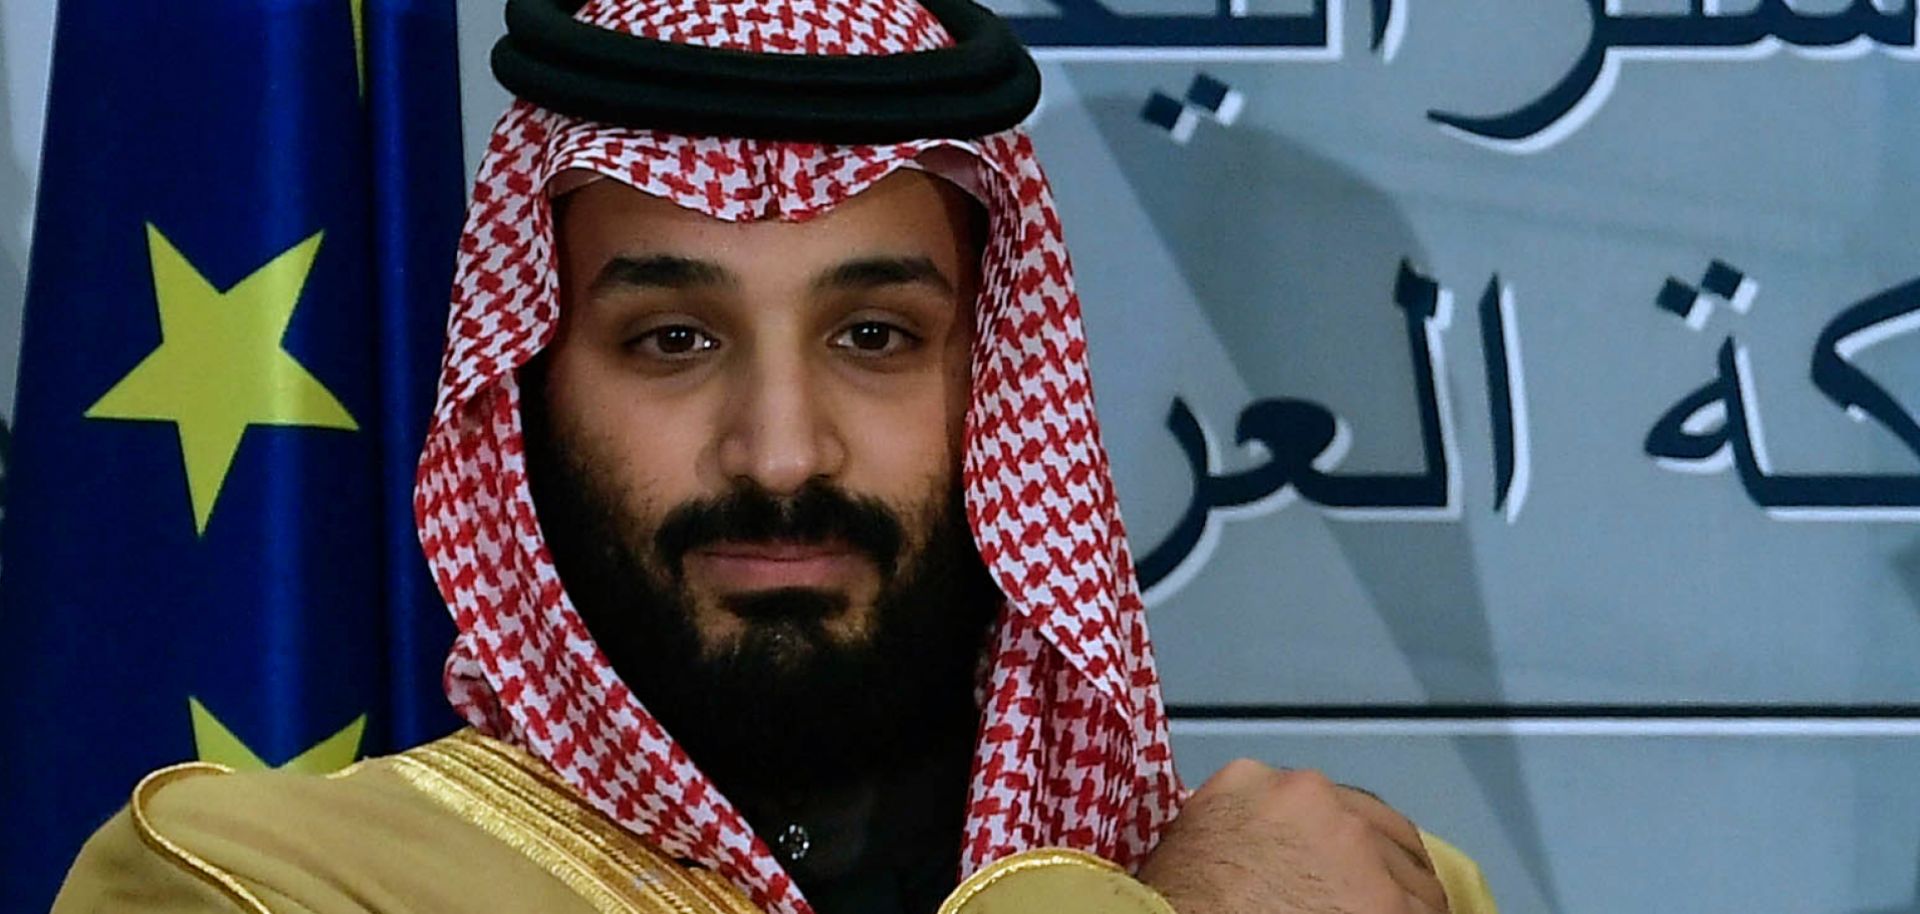 Saudi Crown Prince Mohammed bin Salman poses for a photograph on a visit to the Palace of Moncloa in Madrid, Spain, on April 12, 2018.